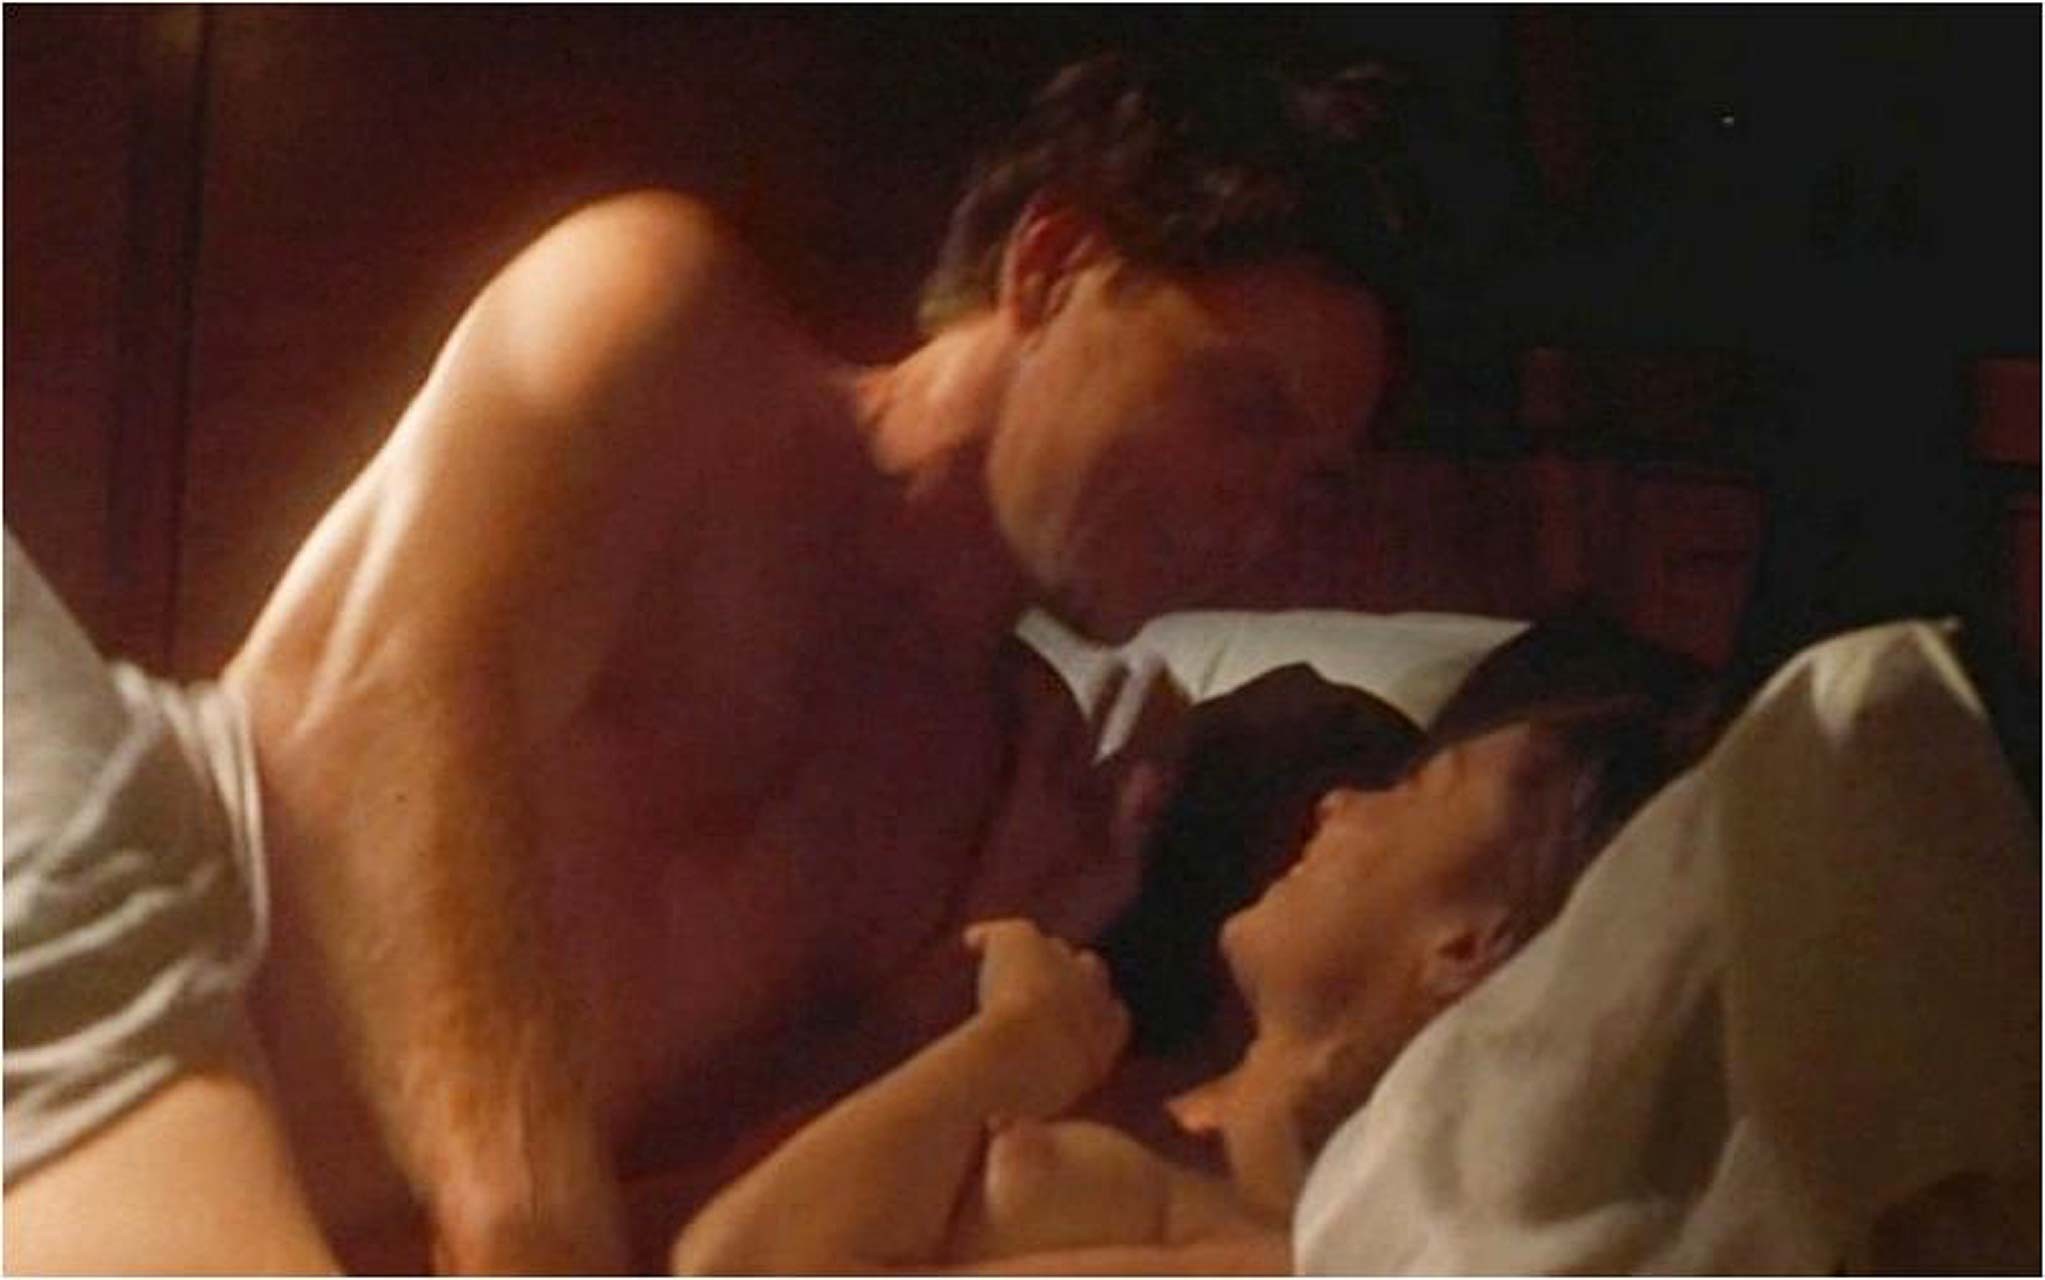 Ashley Judd showing her nice tits and great ass in nude movie scenes #75336247